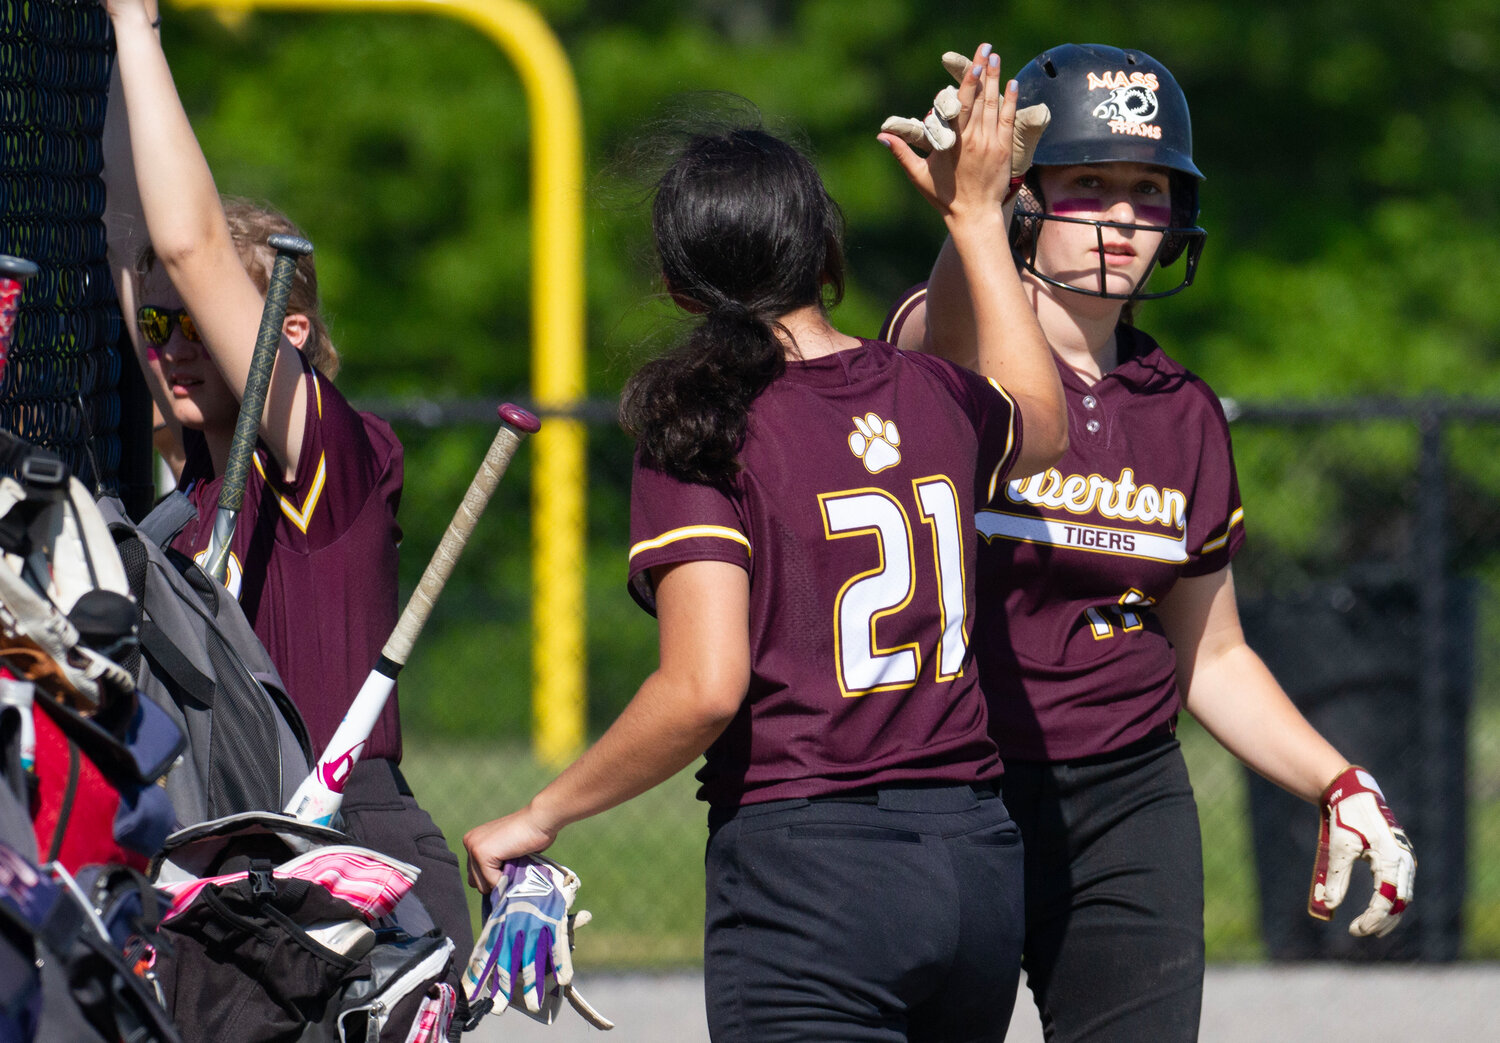 Sam Bettencourt (left) high fives Abby Monkevicz after she came in to score in the first inning. The first baseman belted 4 hits with a triple, drove in a run and scored 5 runs.